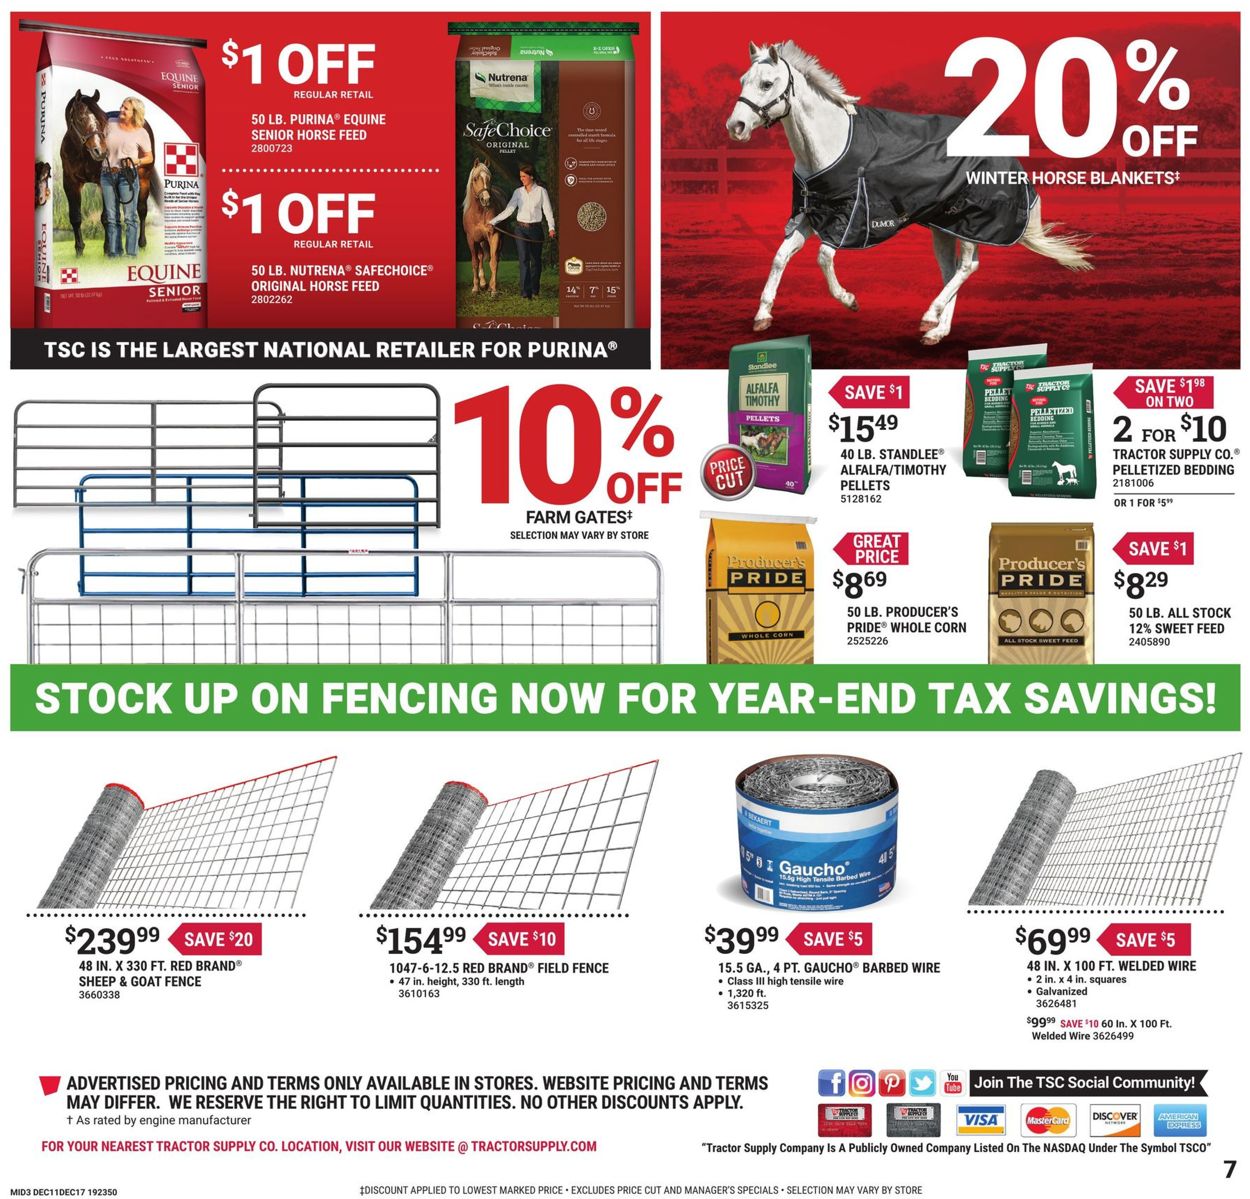 Catalogue Tractor Supply - Christmas Ad 2019 from 12/11/2019